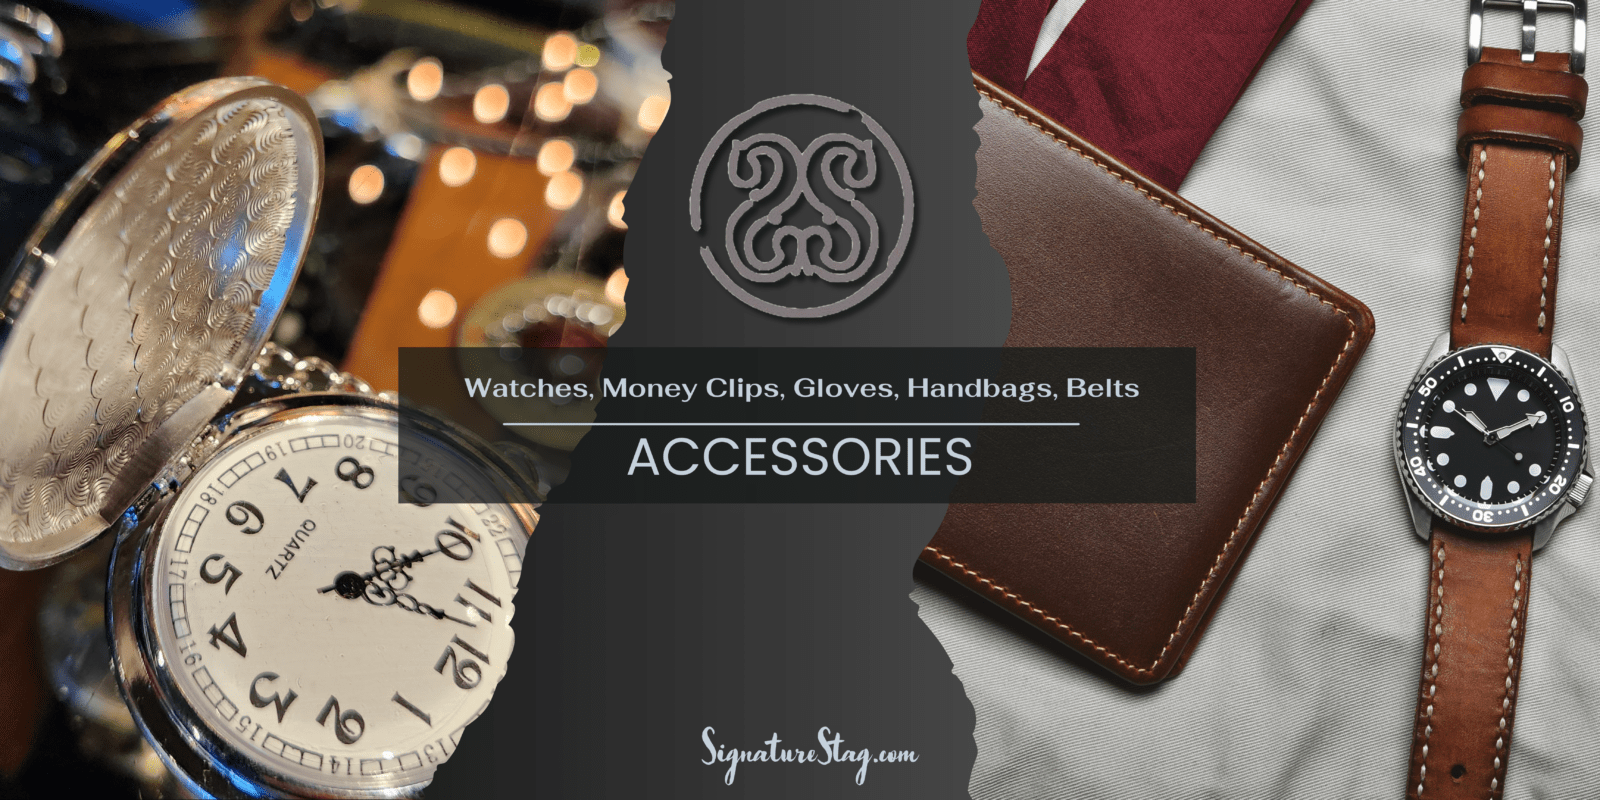 Fashion Accessories for Men at Lubbock TX and Midland TX Clothing Stores. Complete any look with the best men's watches, belts, money clips from top designers